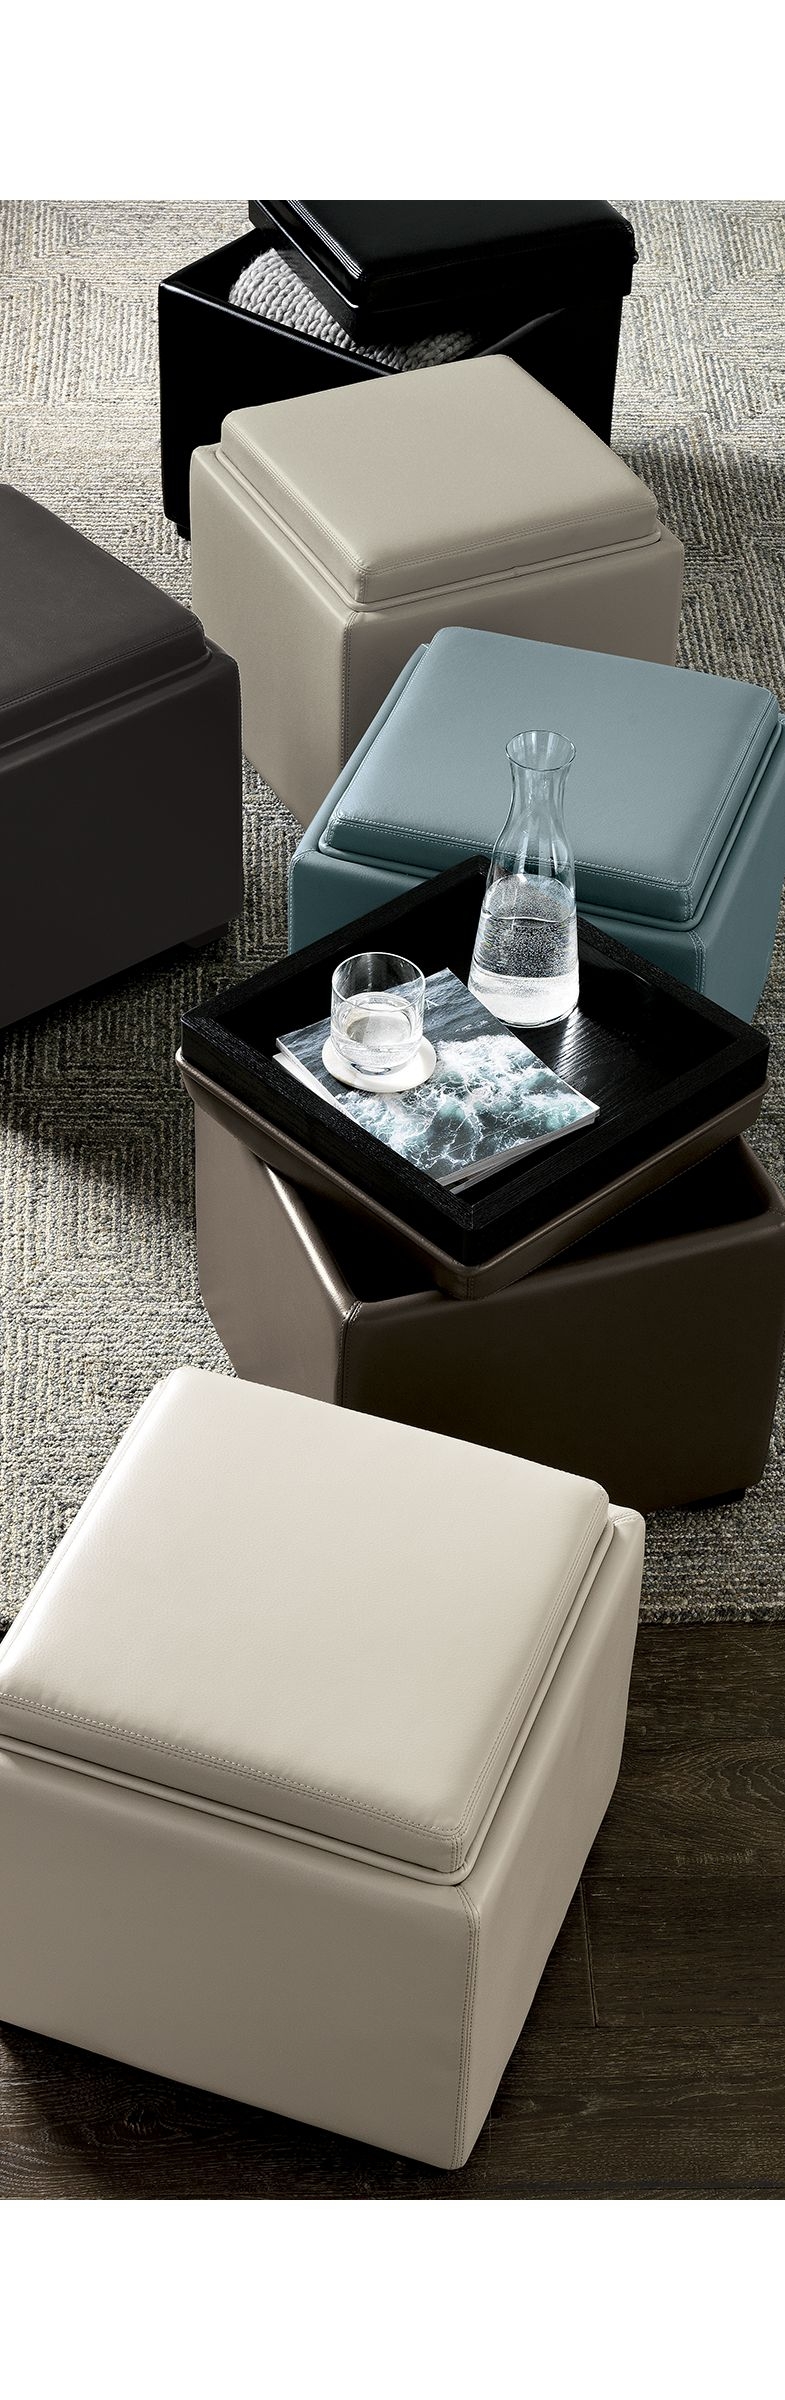 Stow Oyster 17" Leather Storage Ottoman - Image 1